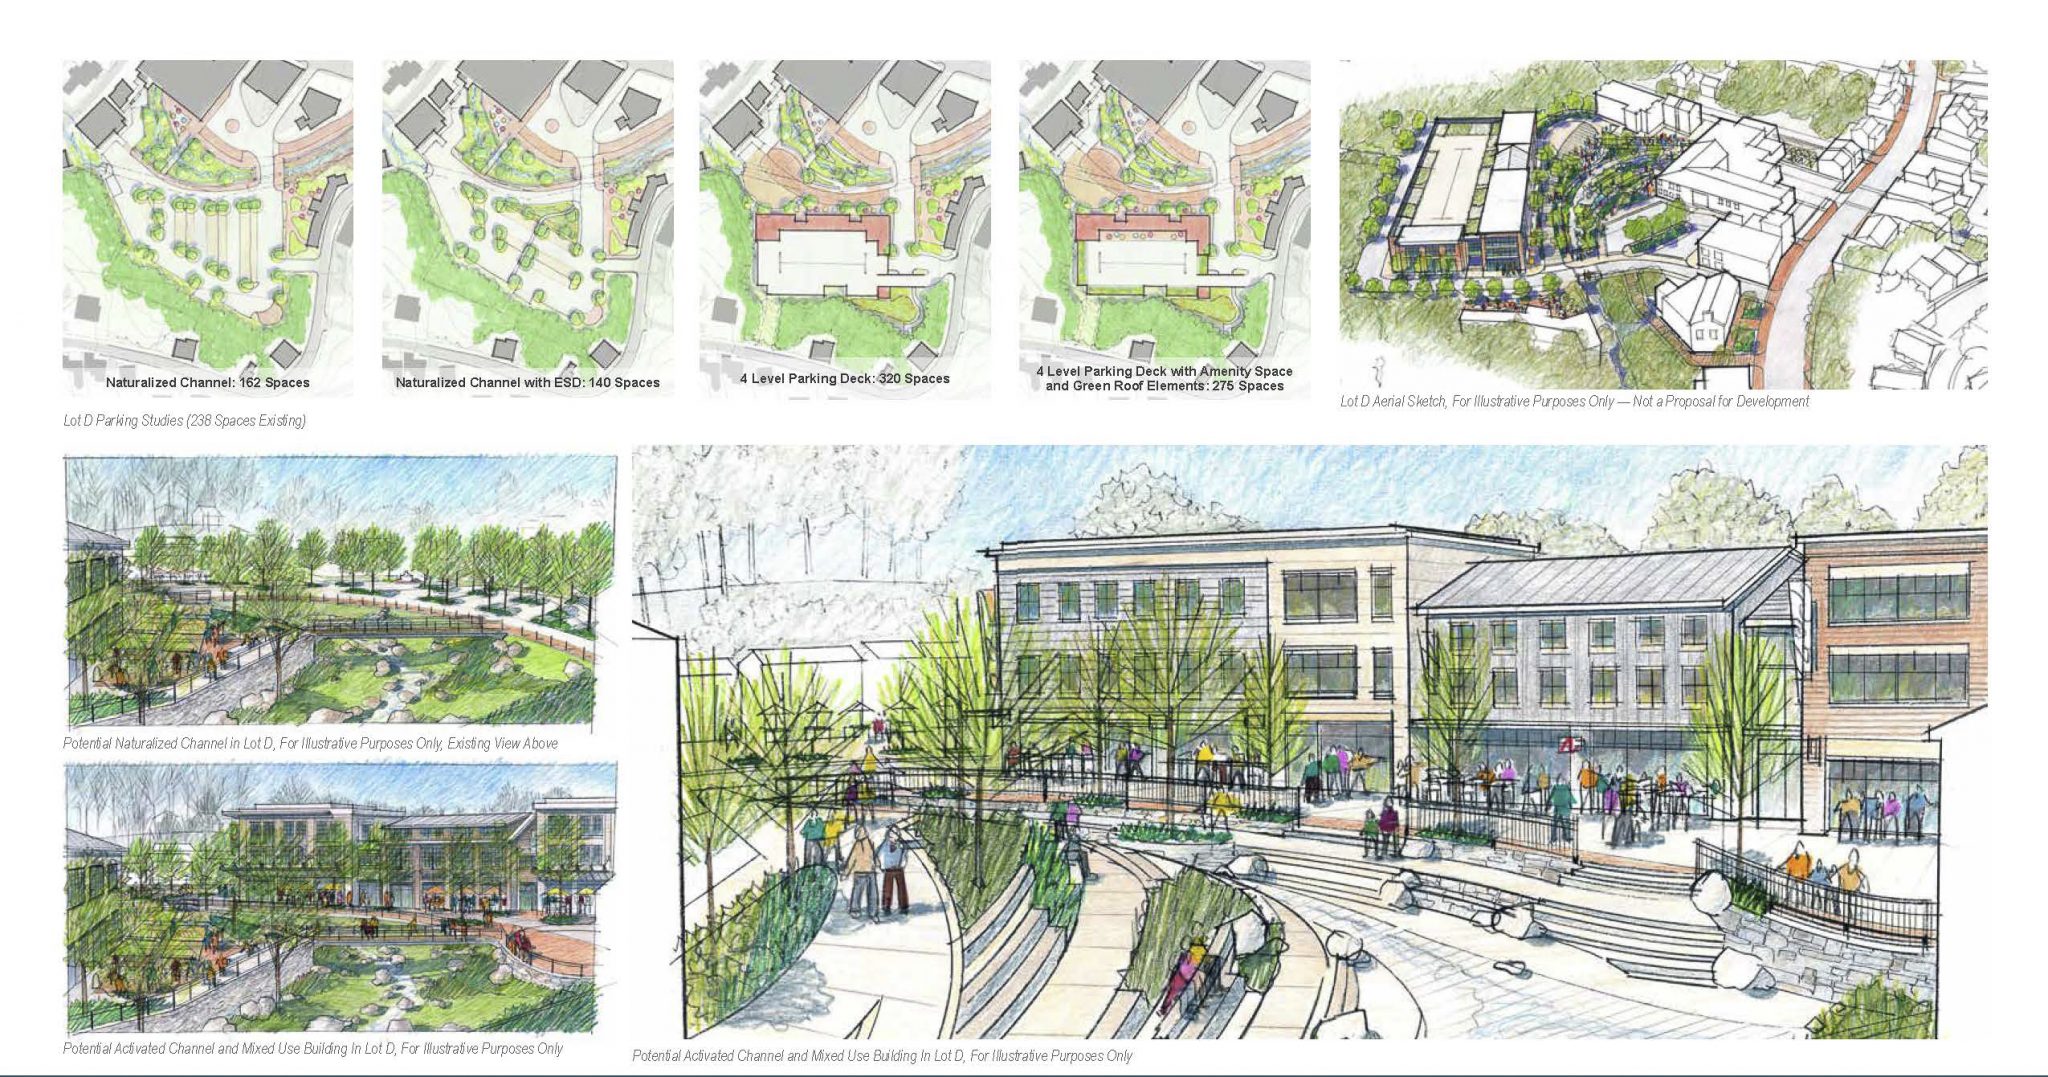 Ellicott City Master Plan: BALANCING NEEDS AND OPPORTUNITIES